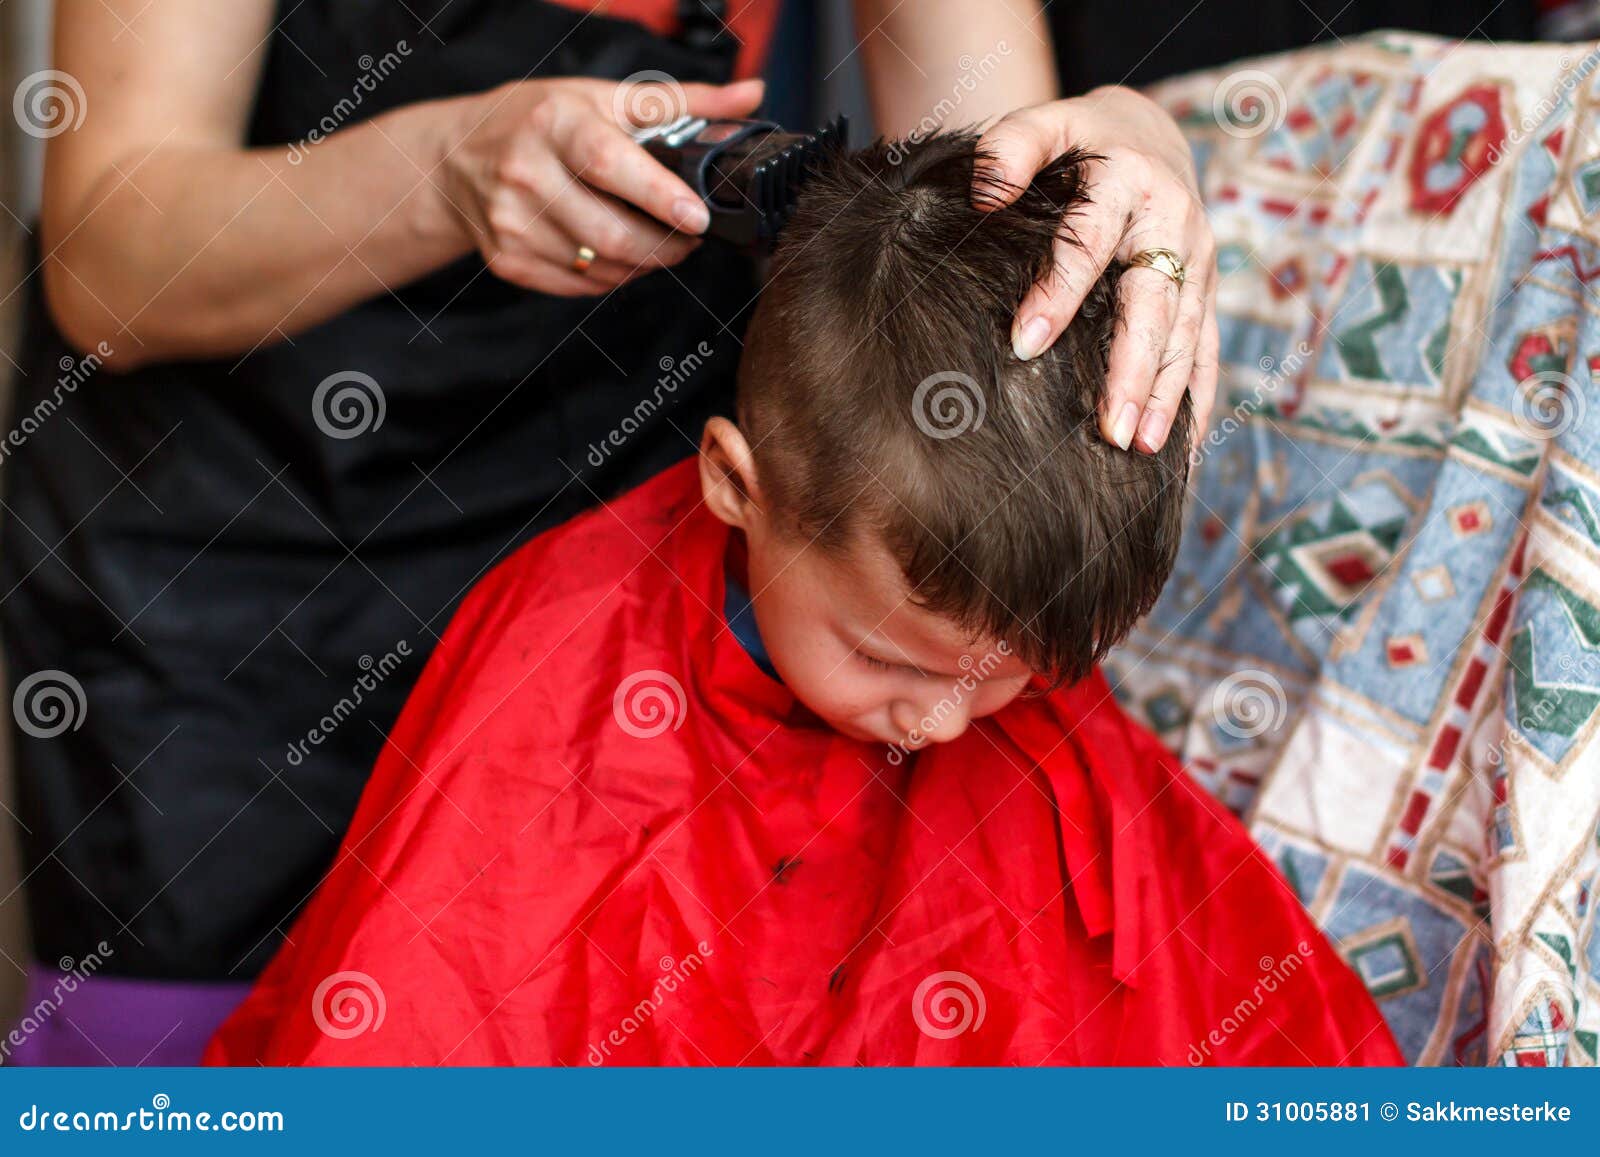 Haircut for Boy at Home with Machine Stock Image - Image of hairstyle,  fingers: 31005881